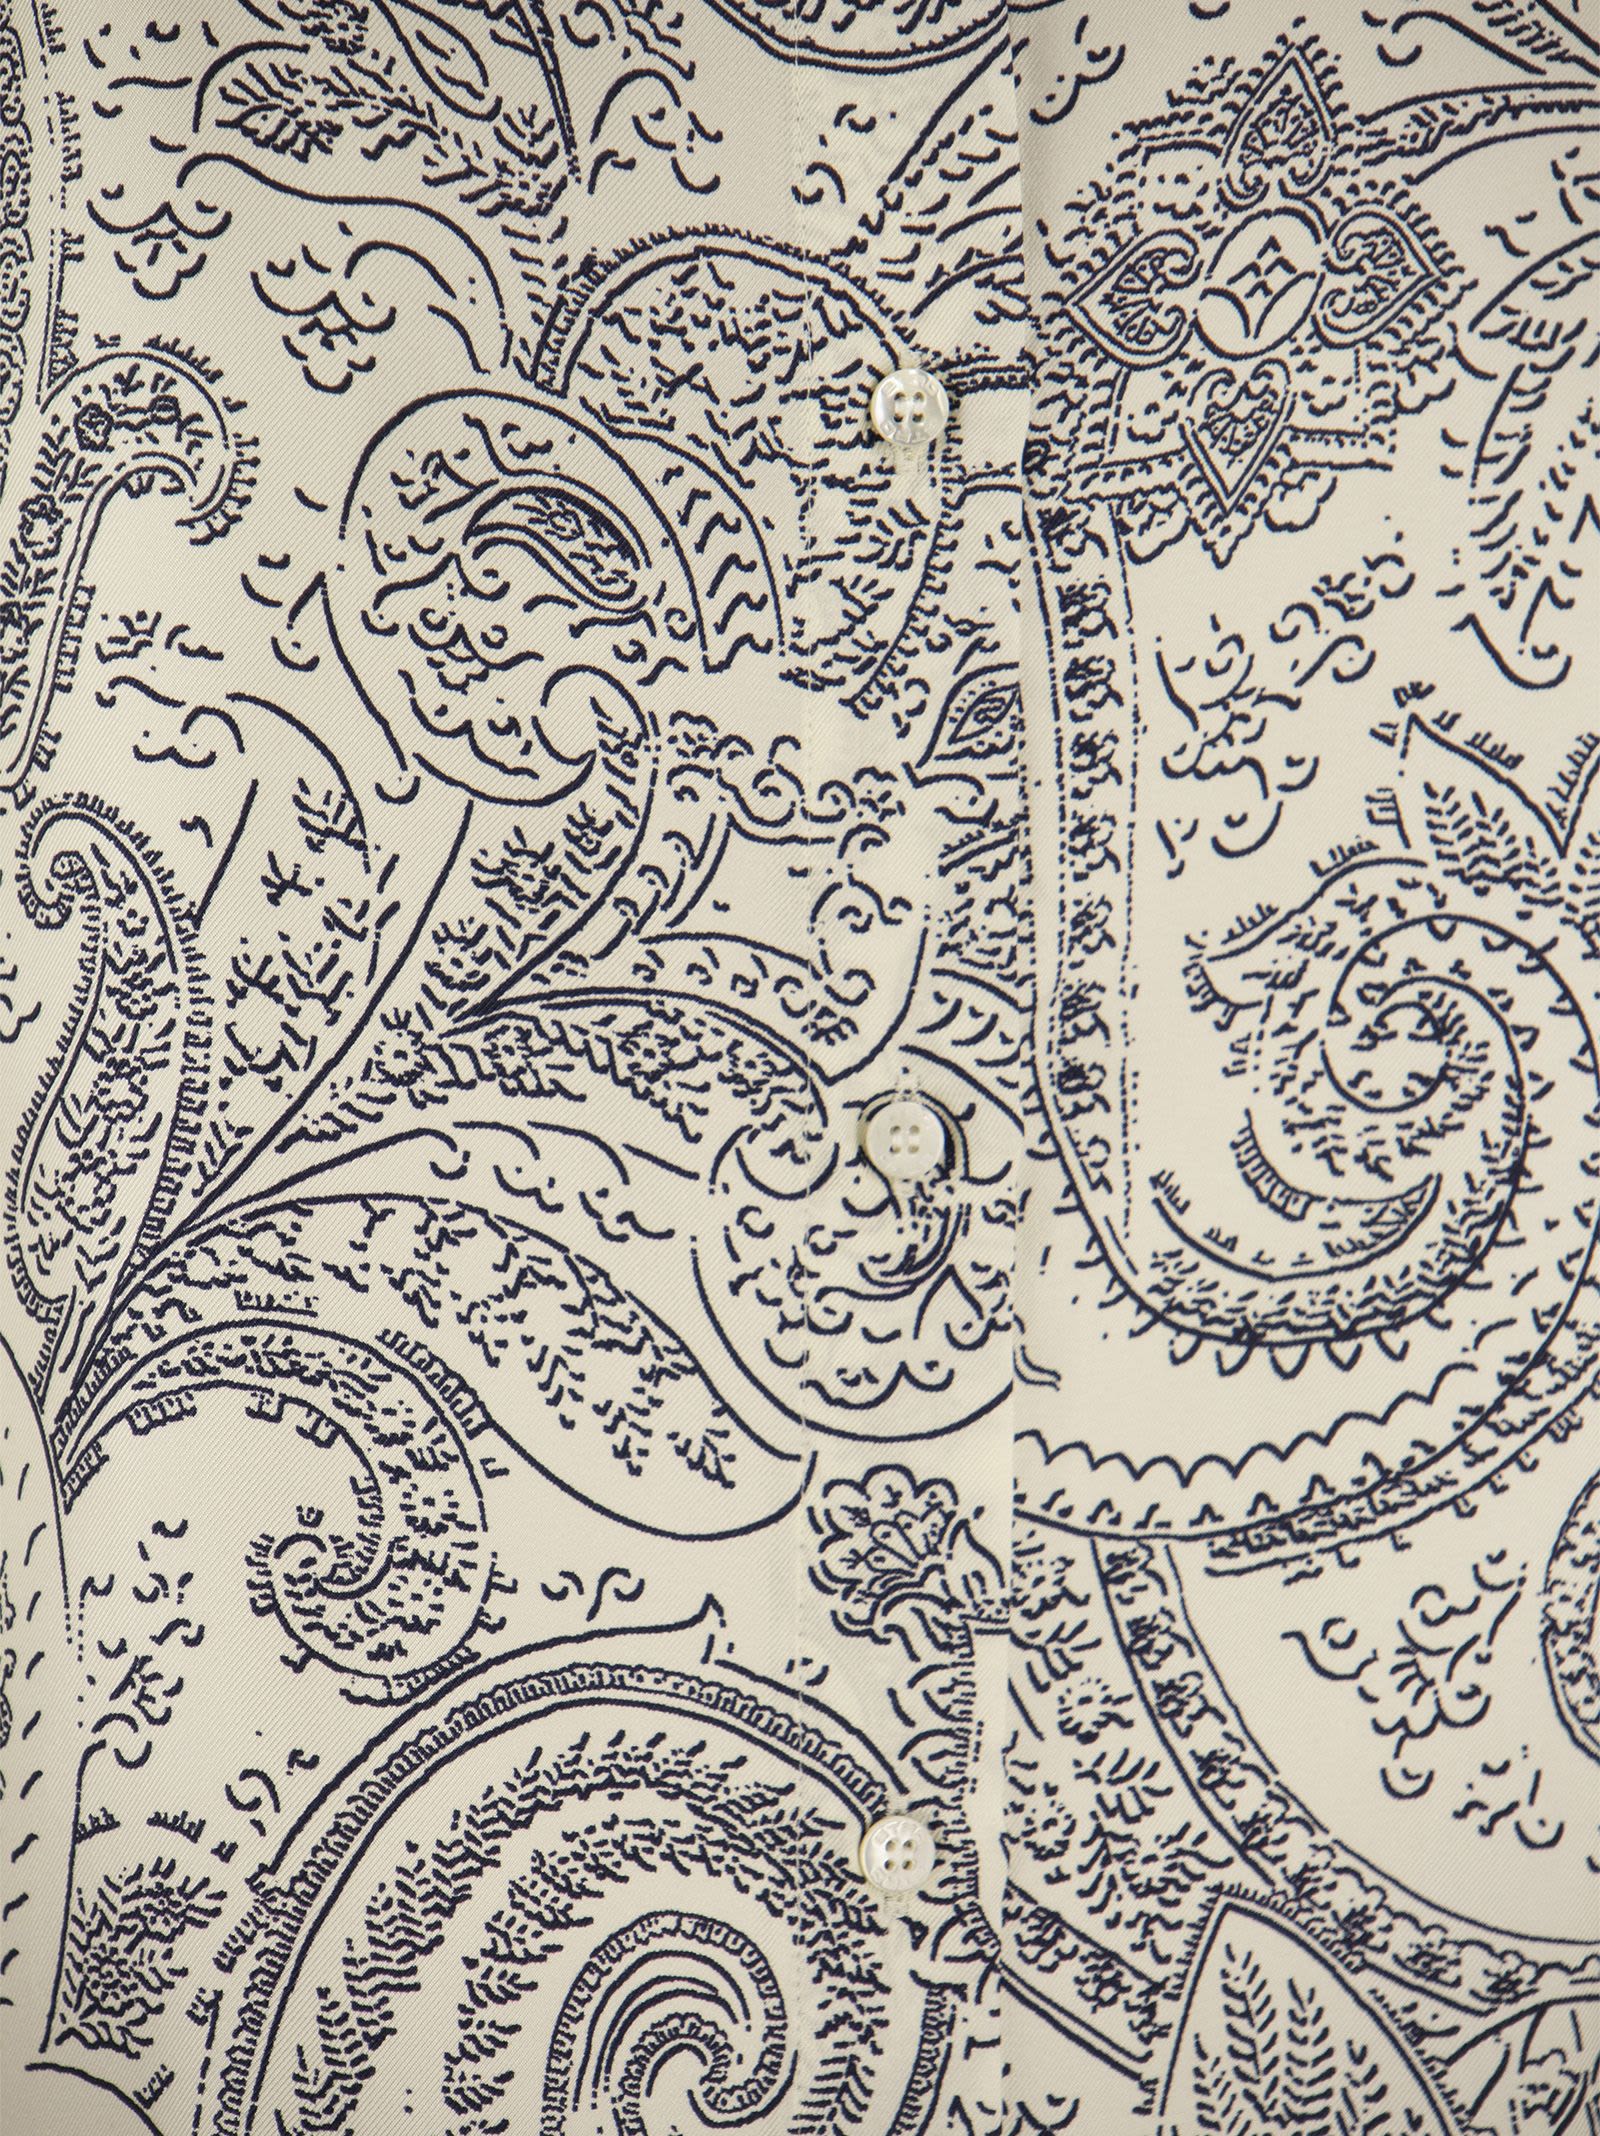 Shop Etro Silk Shirt With Paisley Print In White